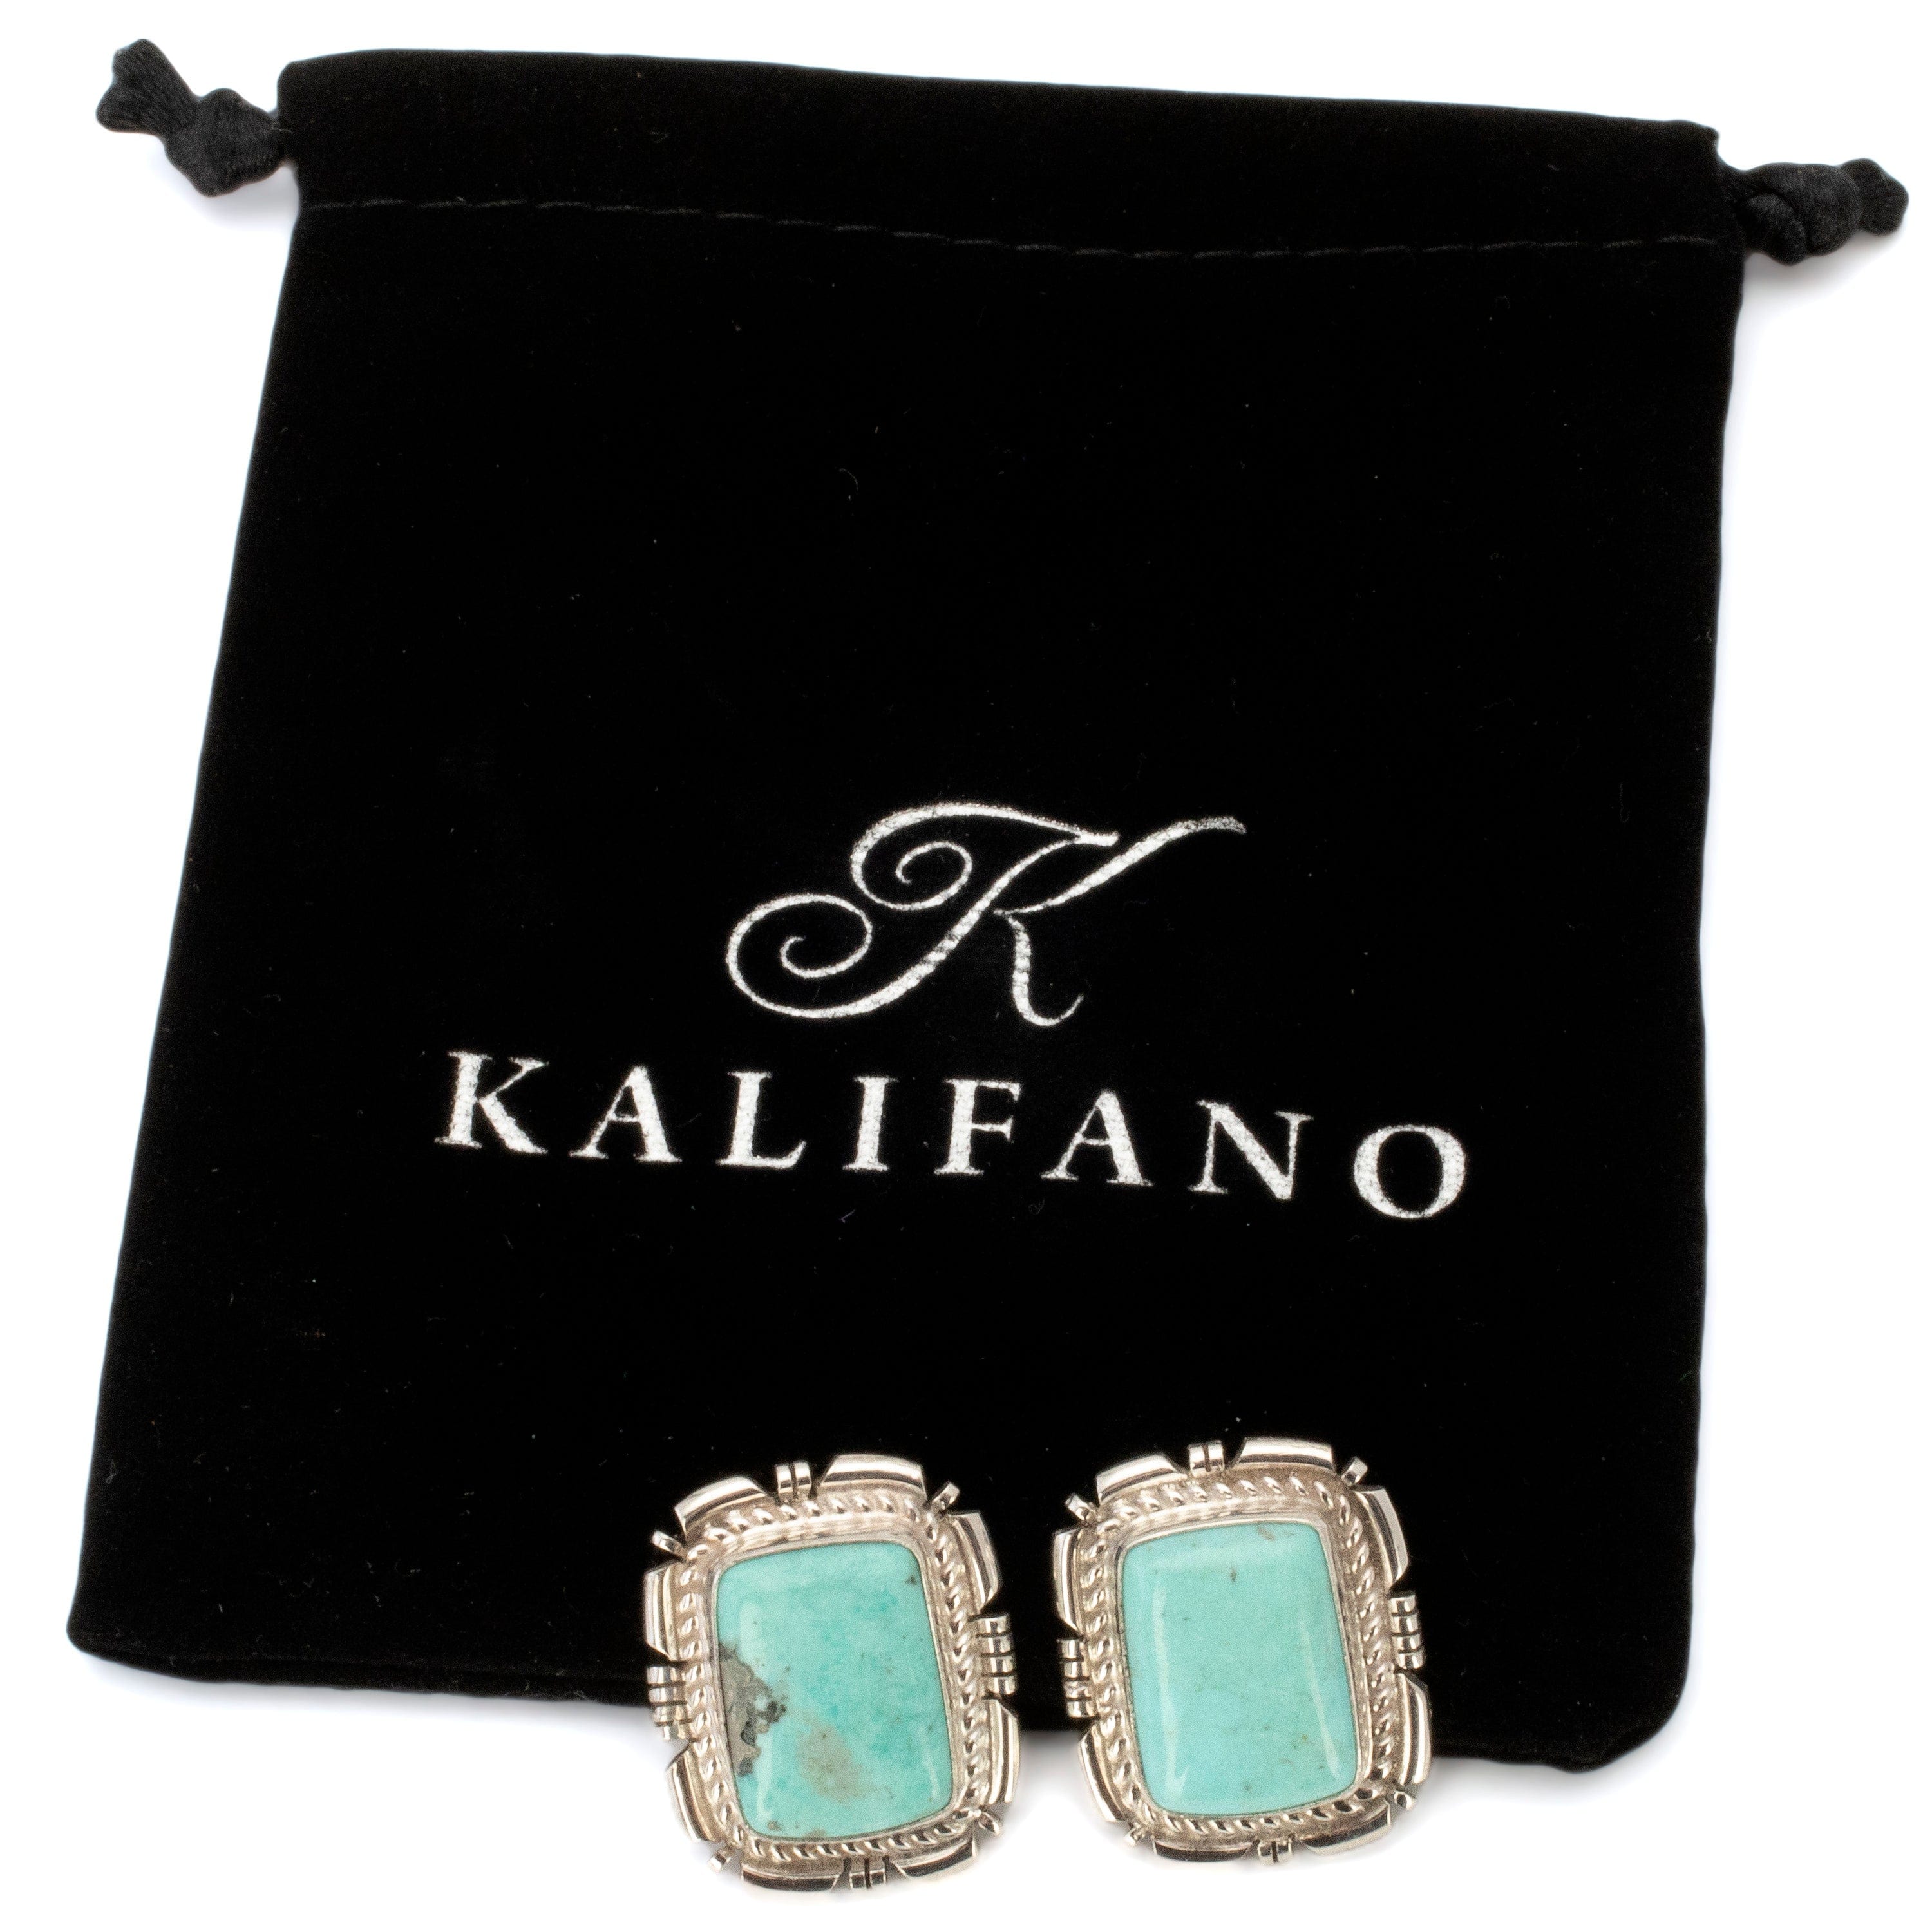 Kalifano Native American Jewelry Eddie Secatero Navajo Campitos Turquoise Rectangular USA Native American Made 925 Sterling Silver Earrings with Stud Backing NAE400.030